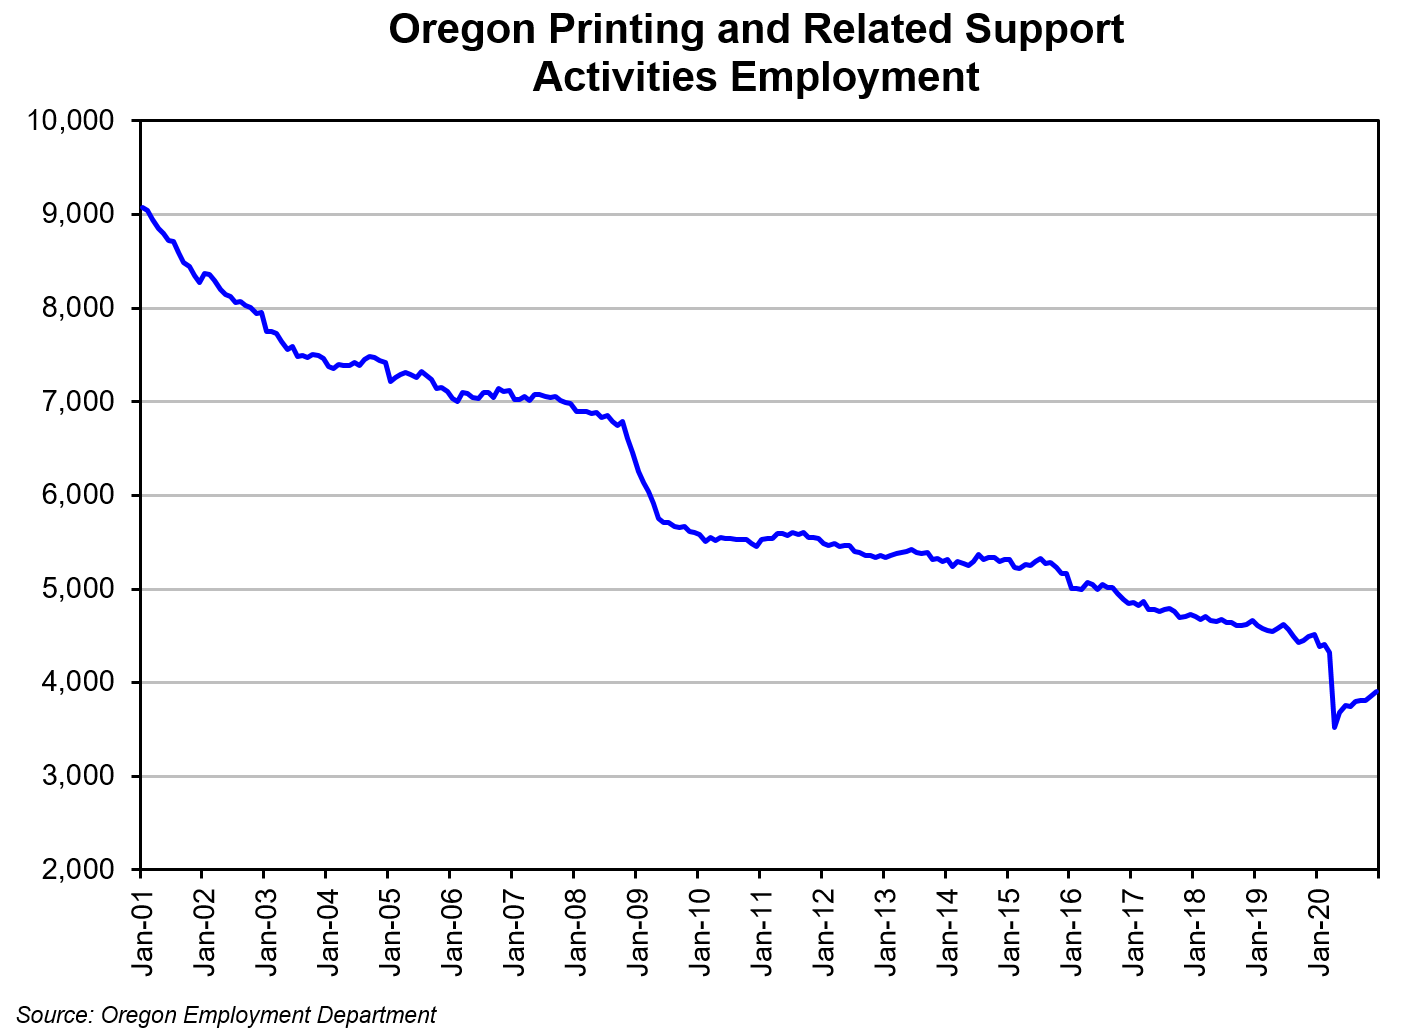 Graph showing Oregon printing and related support activities employment